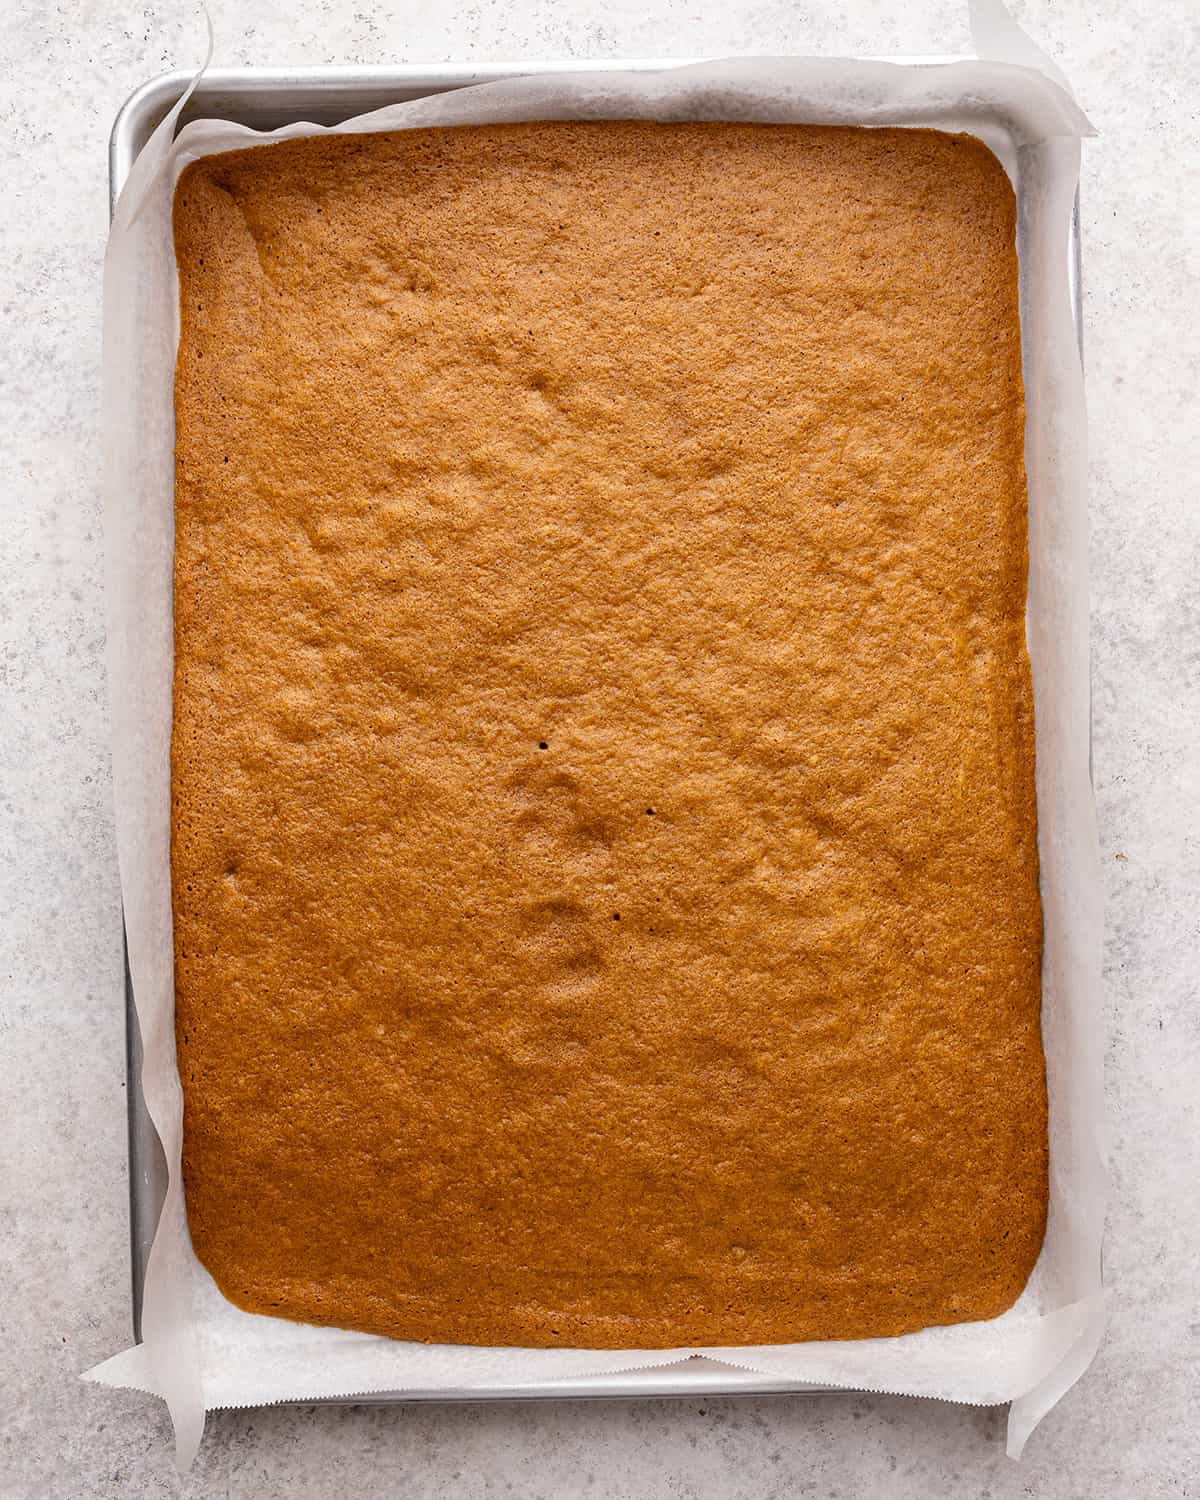 pumpkin roll cake in the baking pan after being baked